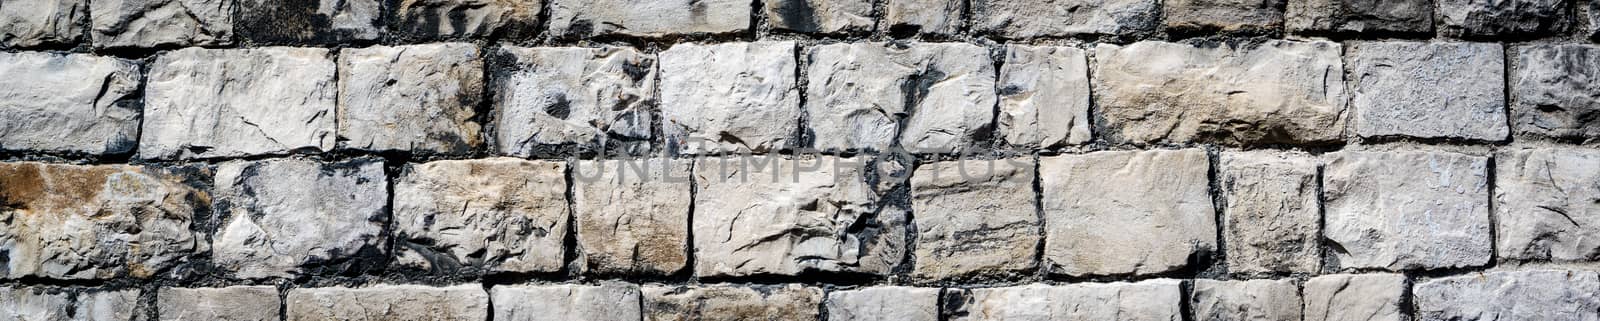 panorama of a cracked real stone wall surface Kendal